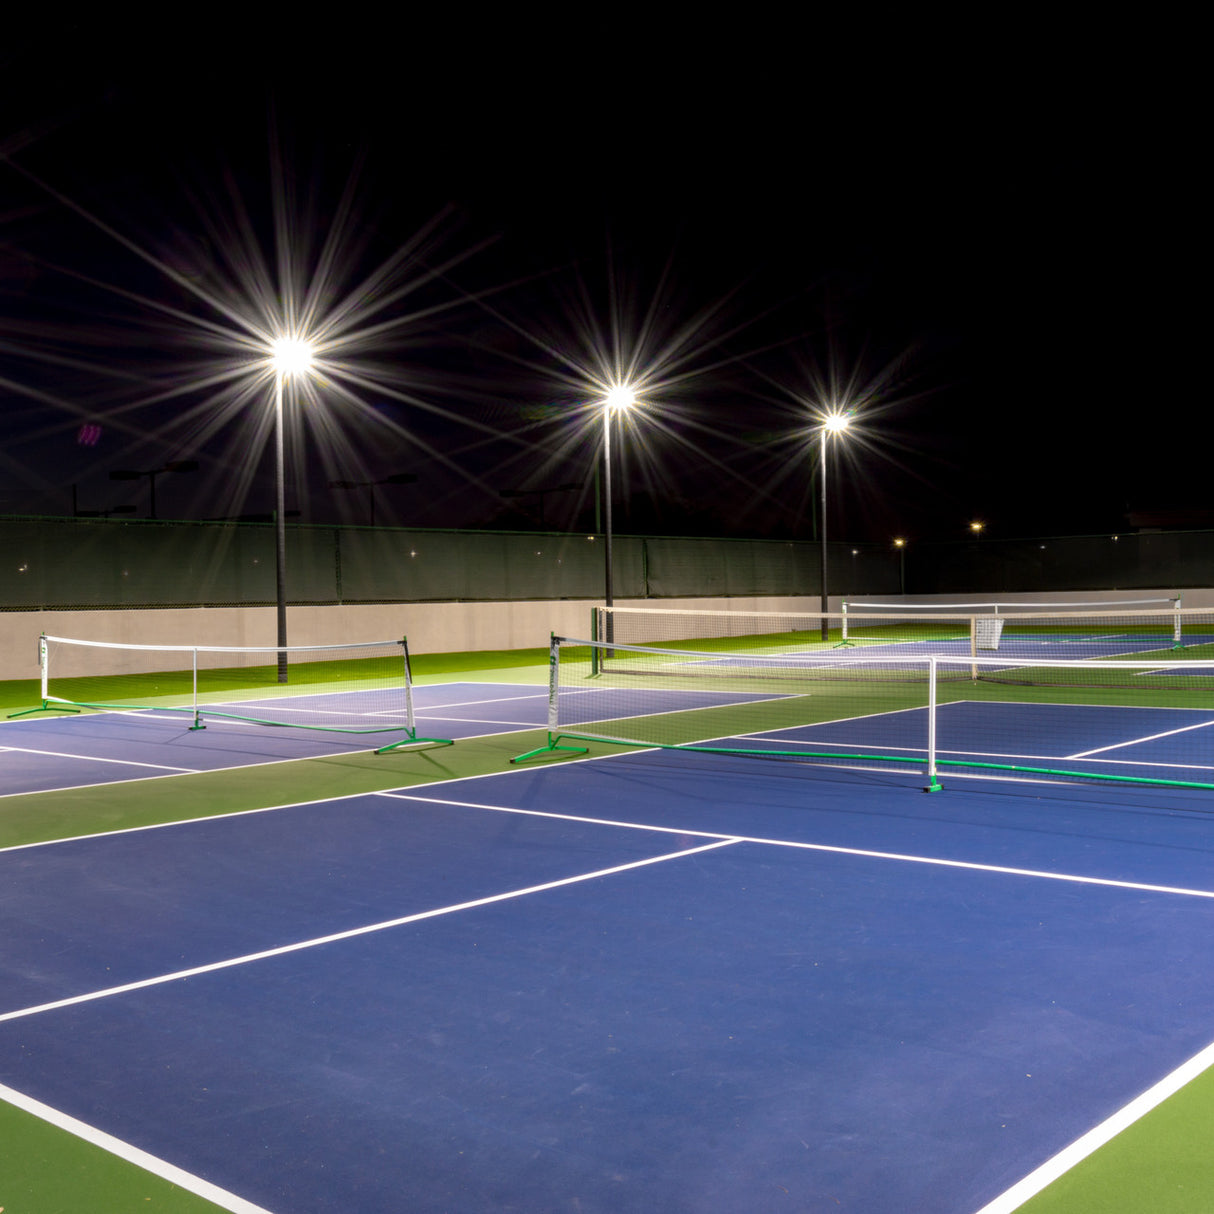 Tennis Court Lighting Kit - 4 Poles + 4 Fixtures, Pre-Shipped Anchor Bolts, Black Finish, Free Shipping!